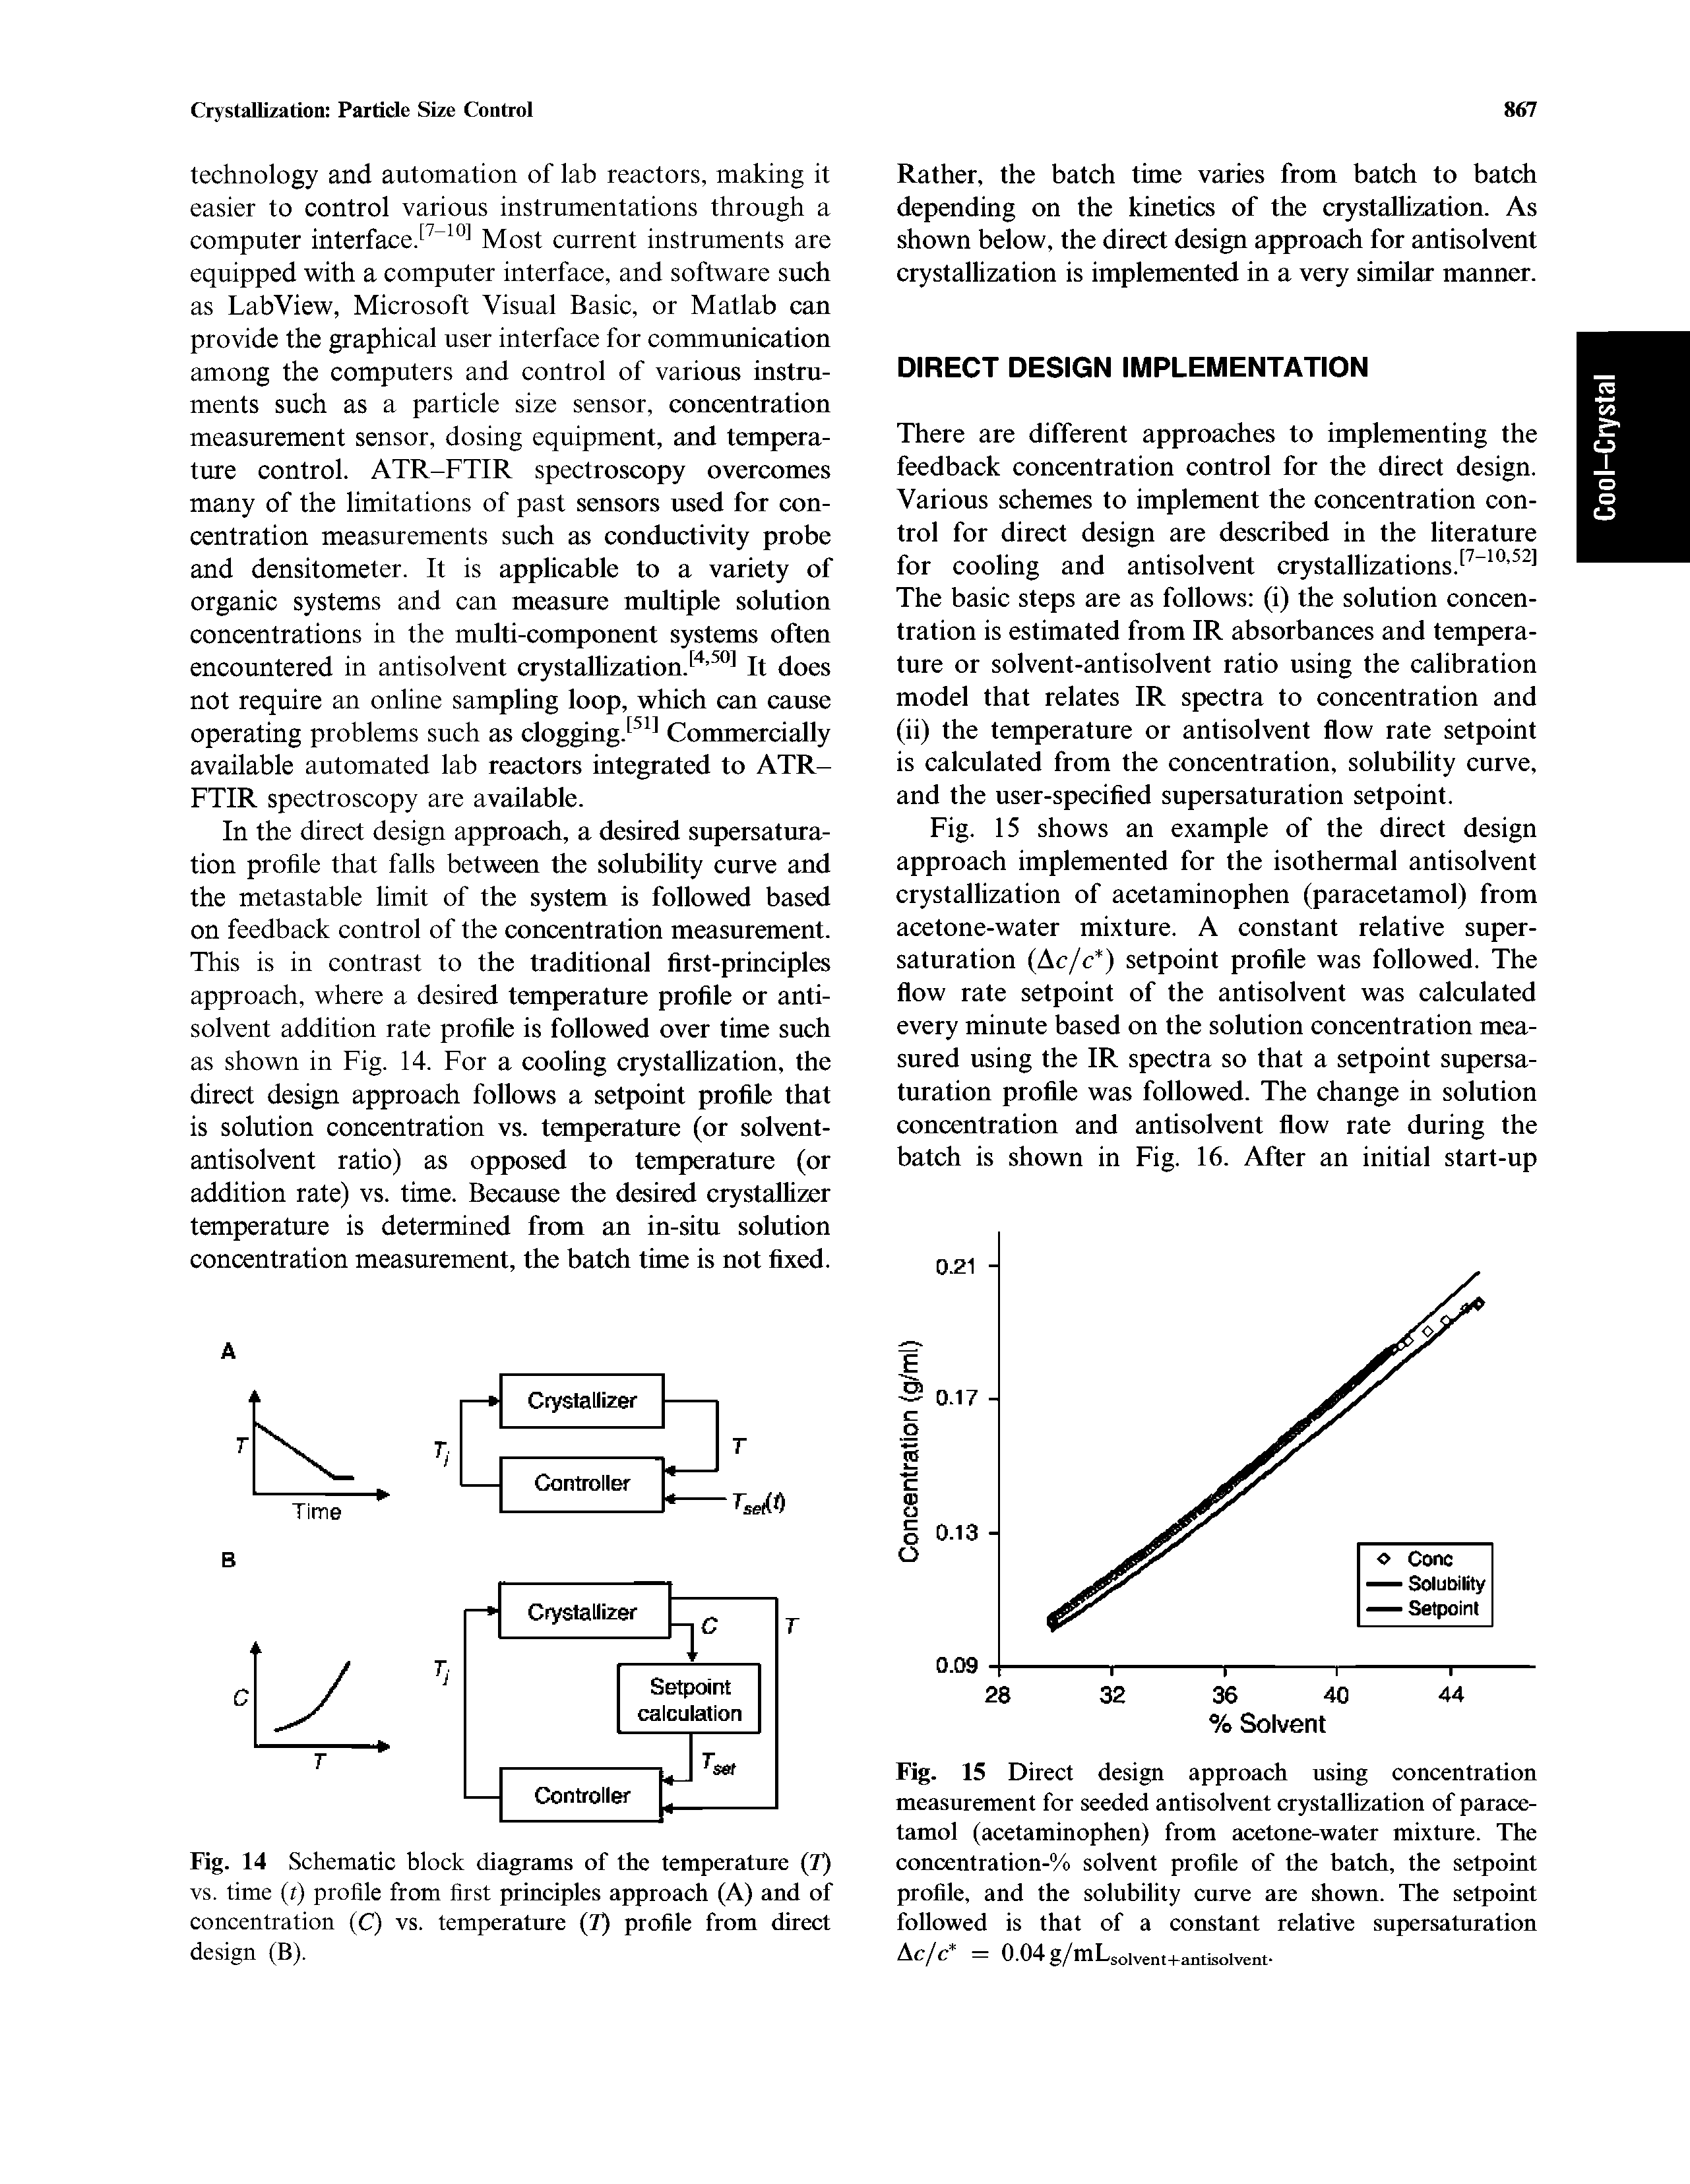 Fig. 15 shows an example of the direct design approach implemented for the isothermal antisolvent crystallization of acetaminophen (paracetamol) from acetone-water mixture. A constant relative supersaturation (Ac/c ) setpoint profile was followed. The flow rate setpoint of the antisolvent was calculated every minute based on the solution concentration measured using the IR spectra so that a setpoint supersaturation profile was followed. The change in solution concentration and antisolvent flow rate during the batch is shown in Fig. 16. After an initial start-up...